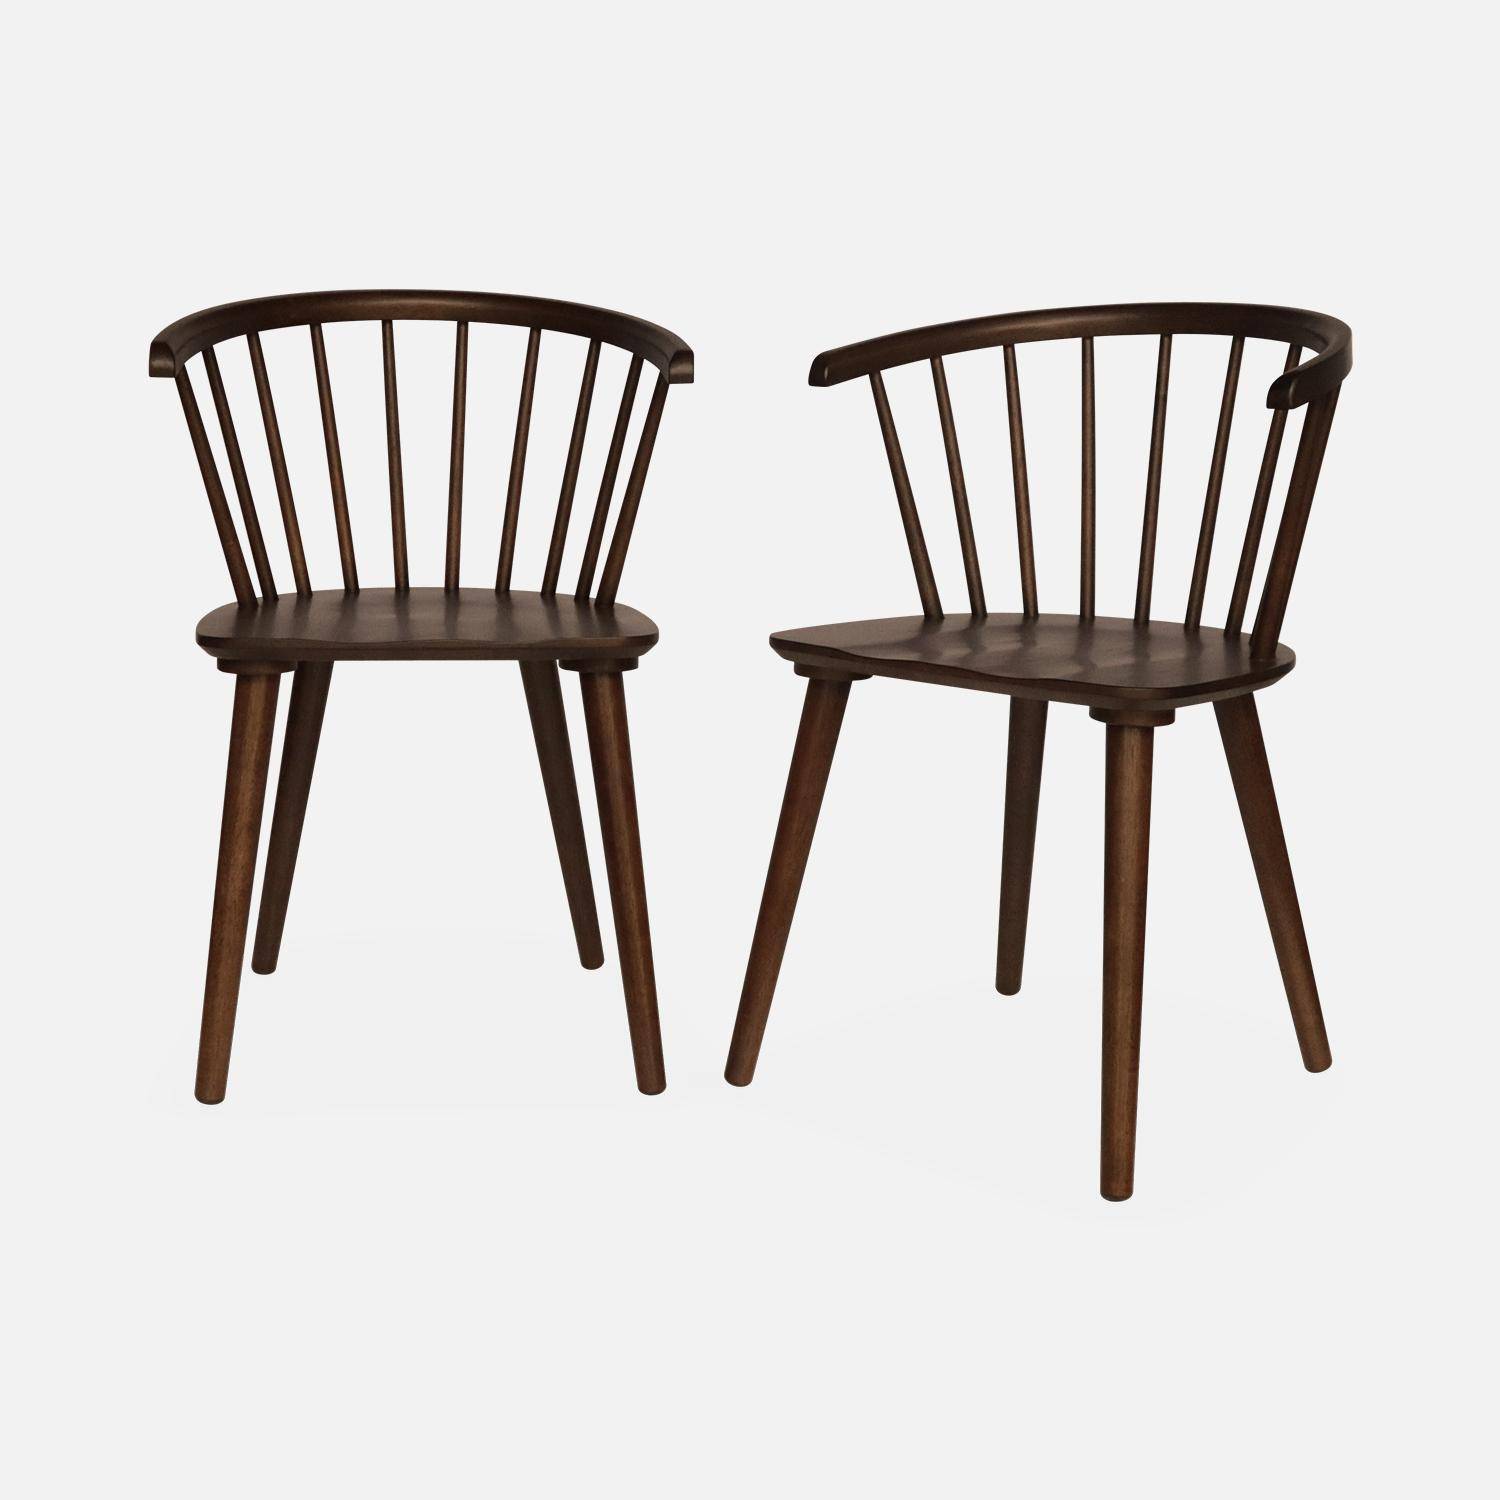 Pair of Wood and Plywood Spindle Chairs, dark wood, L53 x W47.5 x H76cm,sweeek,Photo3